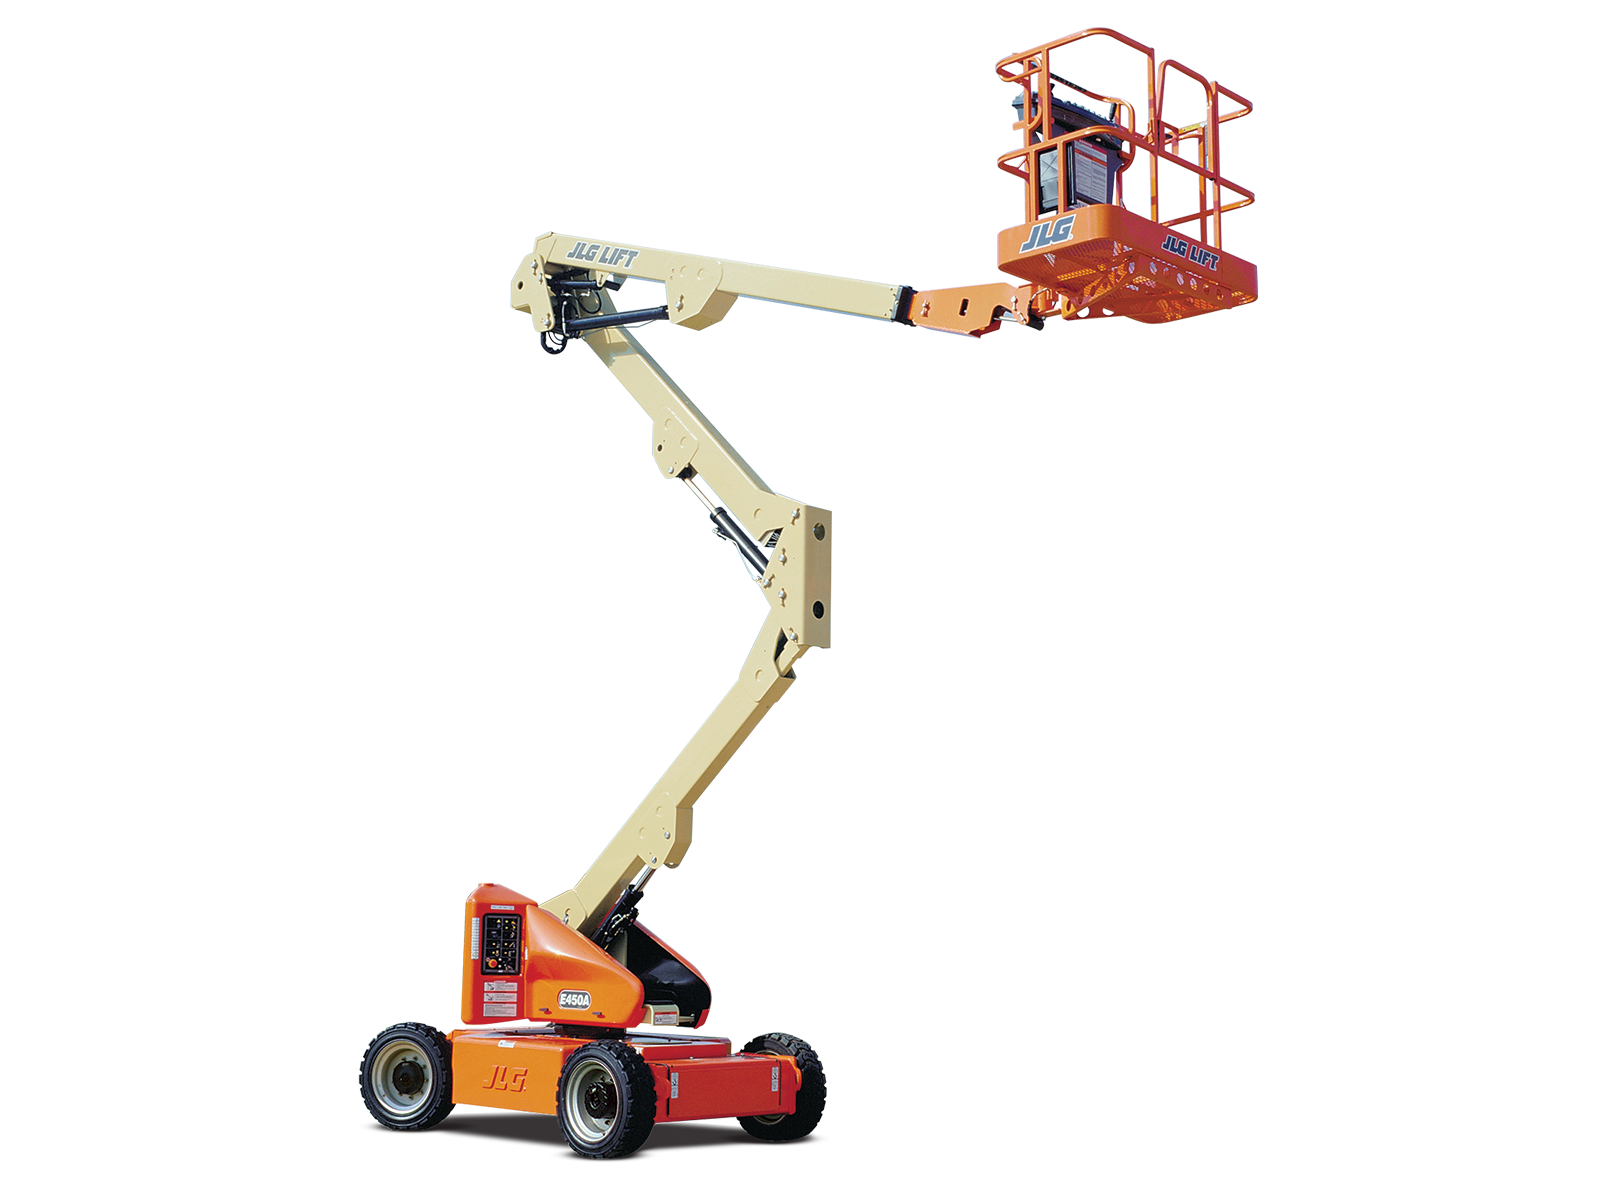 https://cdn-jlg.scdn5.secure.raxcdn.com/-/media/jlg/current-materials-no-password/products/europe---ce/electric-and-hybrid-boom-lifts/e-m-450-series/e450a-electric-boom/images/e450a-gallery-silo.png?rev=12a702a241674213a0f96b2a23a0dc24